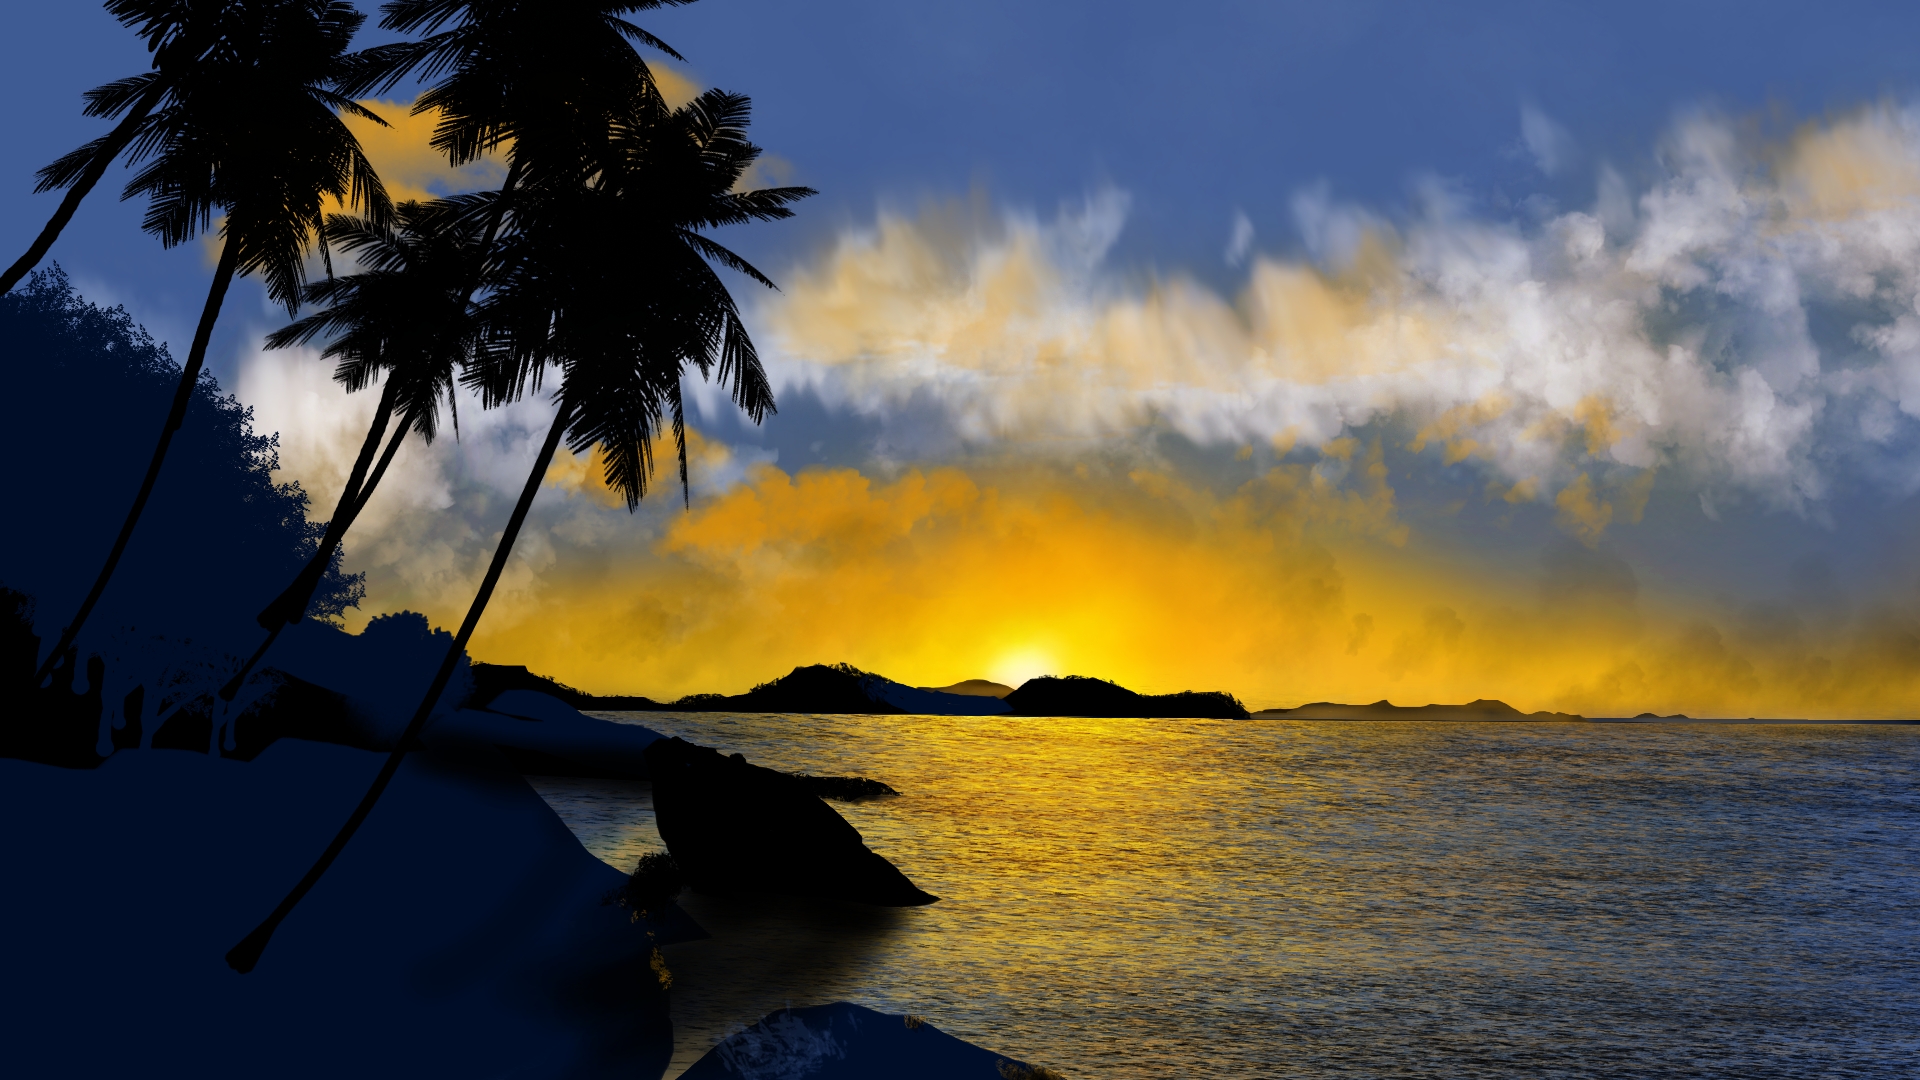 Digital Painting Digital Art Nature Ocean View Palm Trees Sunset Clouds Water Trees 1920x1080